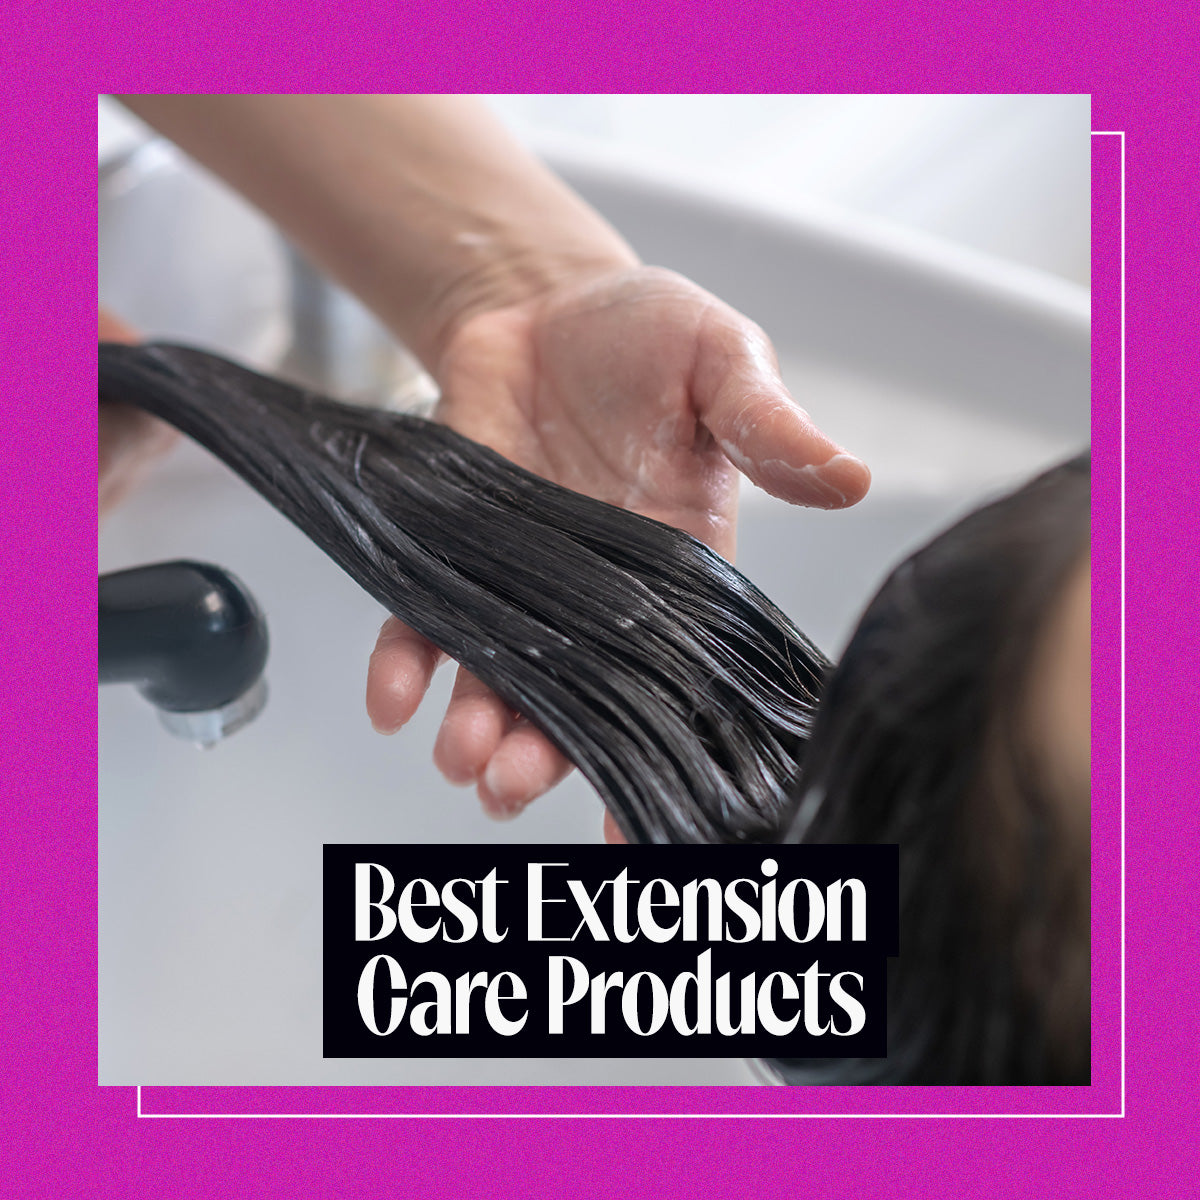 The Best Extension Care Products You Need